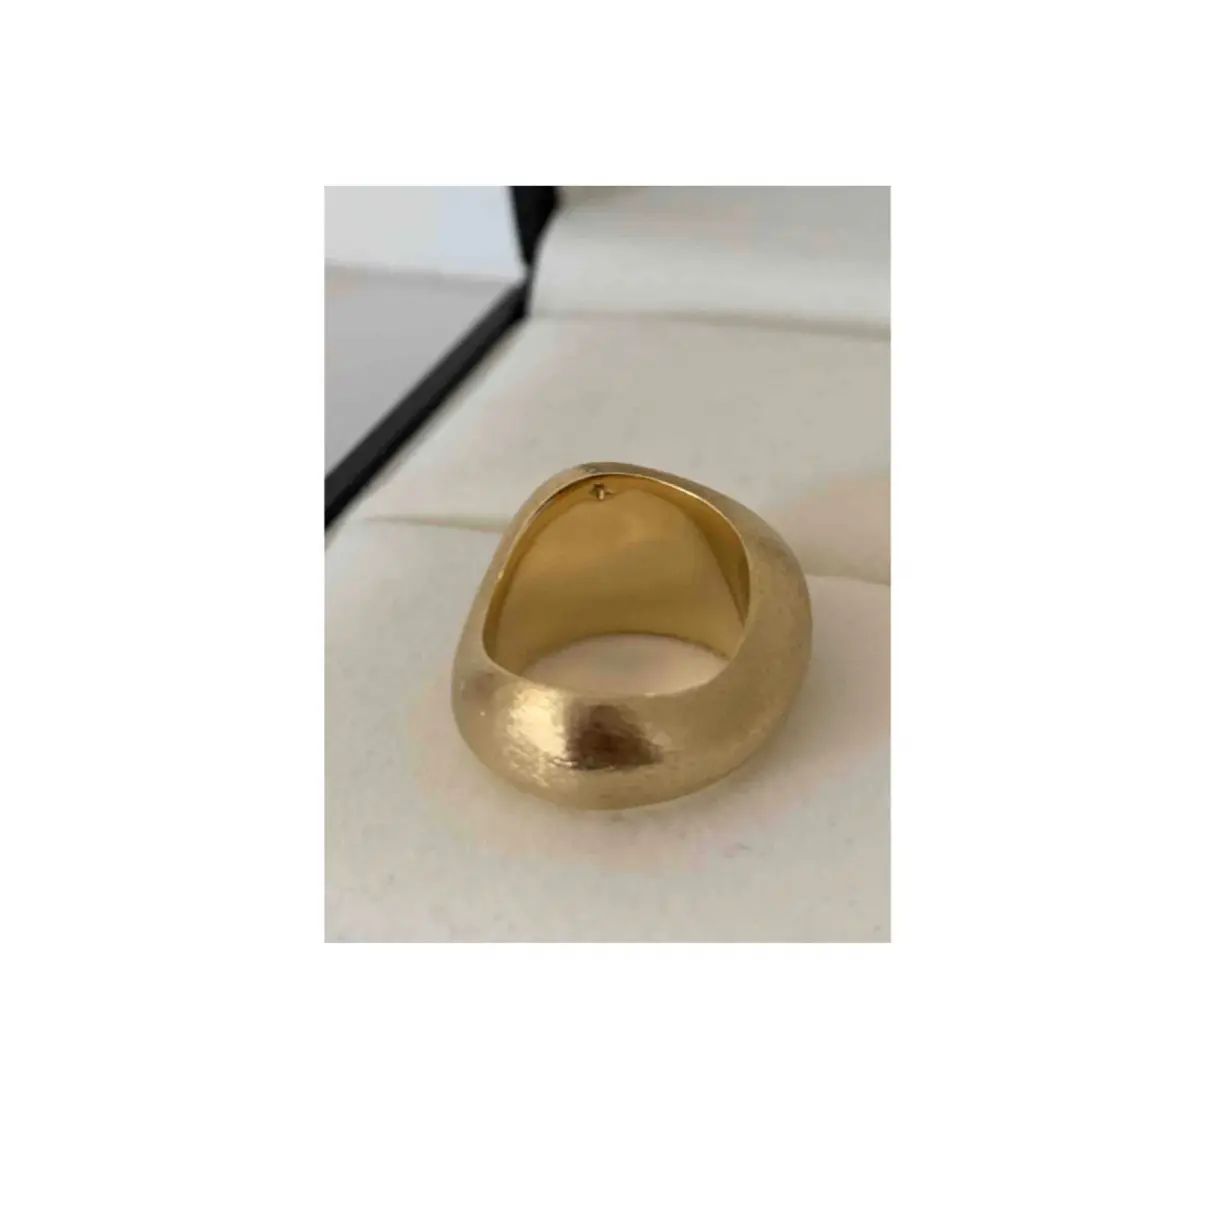 Buy H. Stern Yellow gold ring online